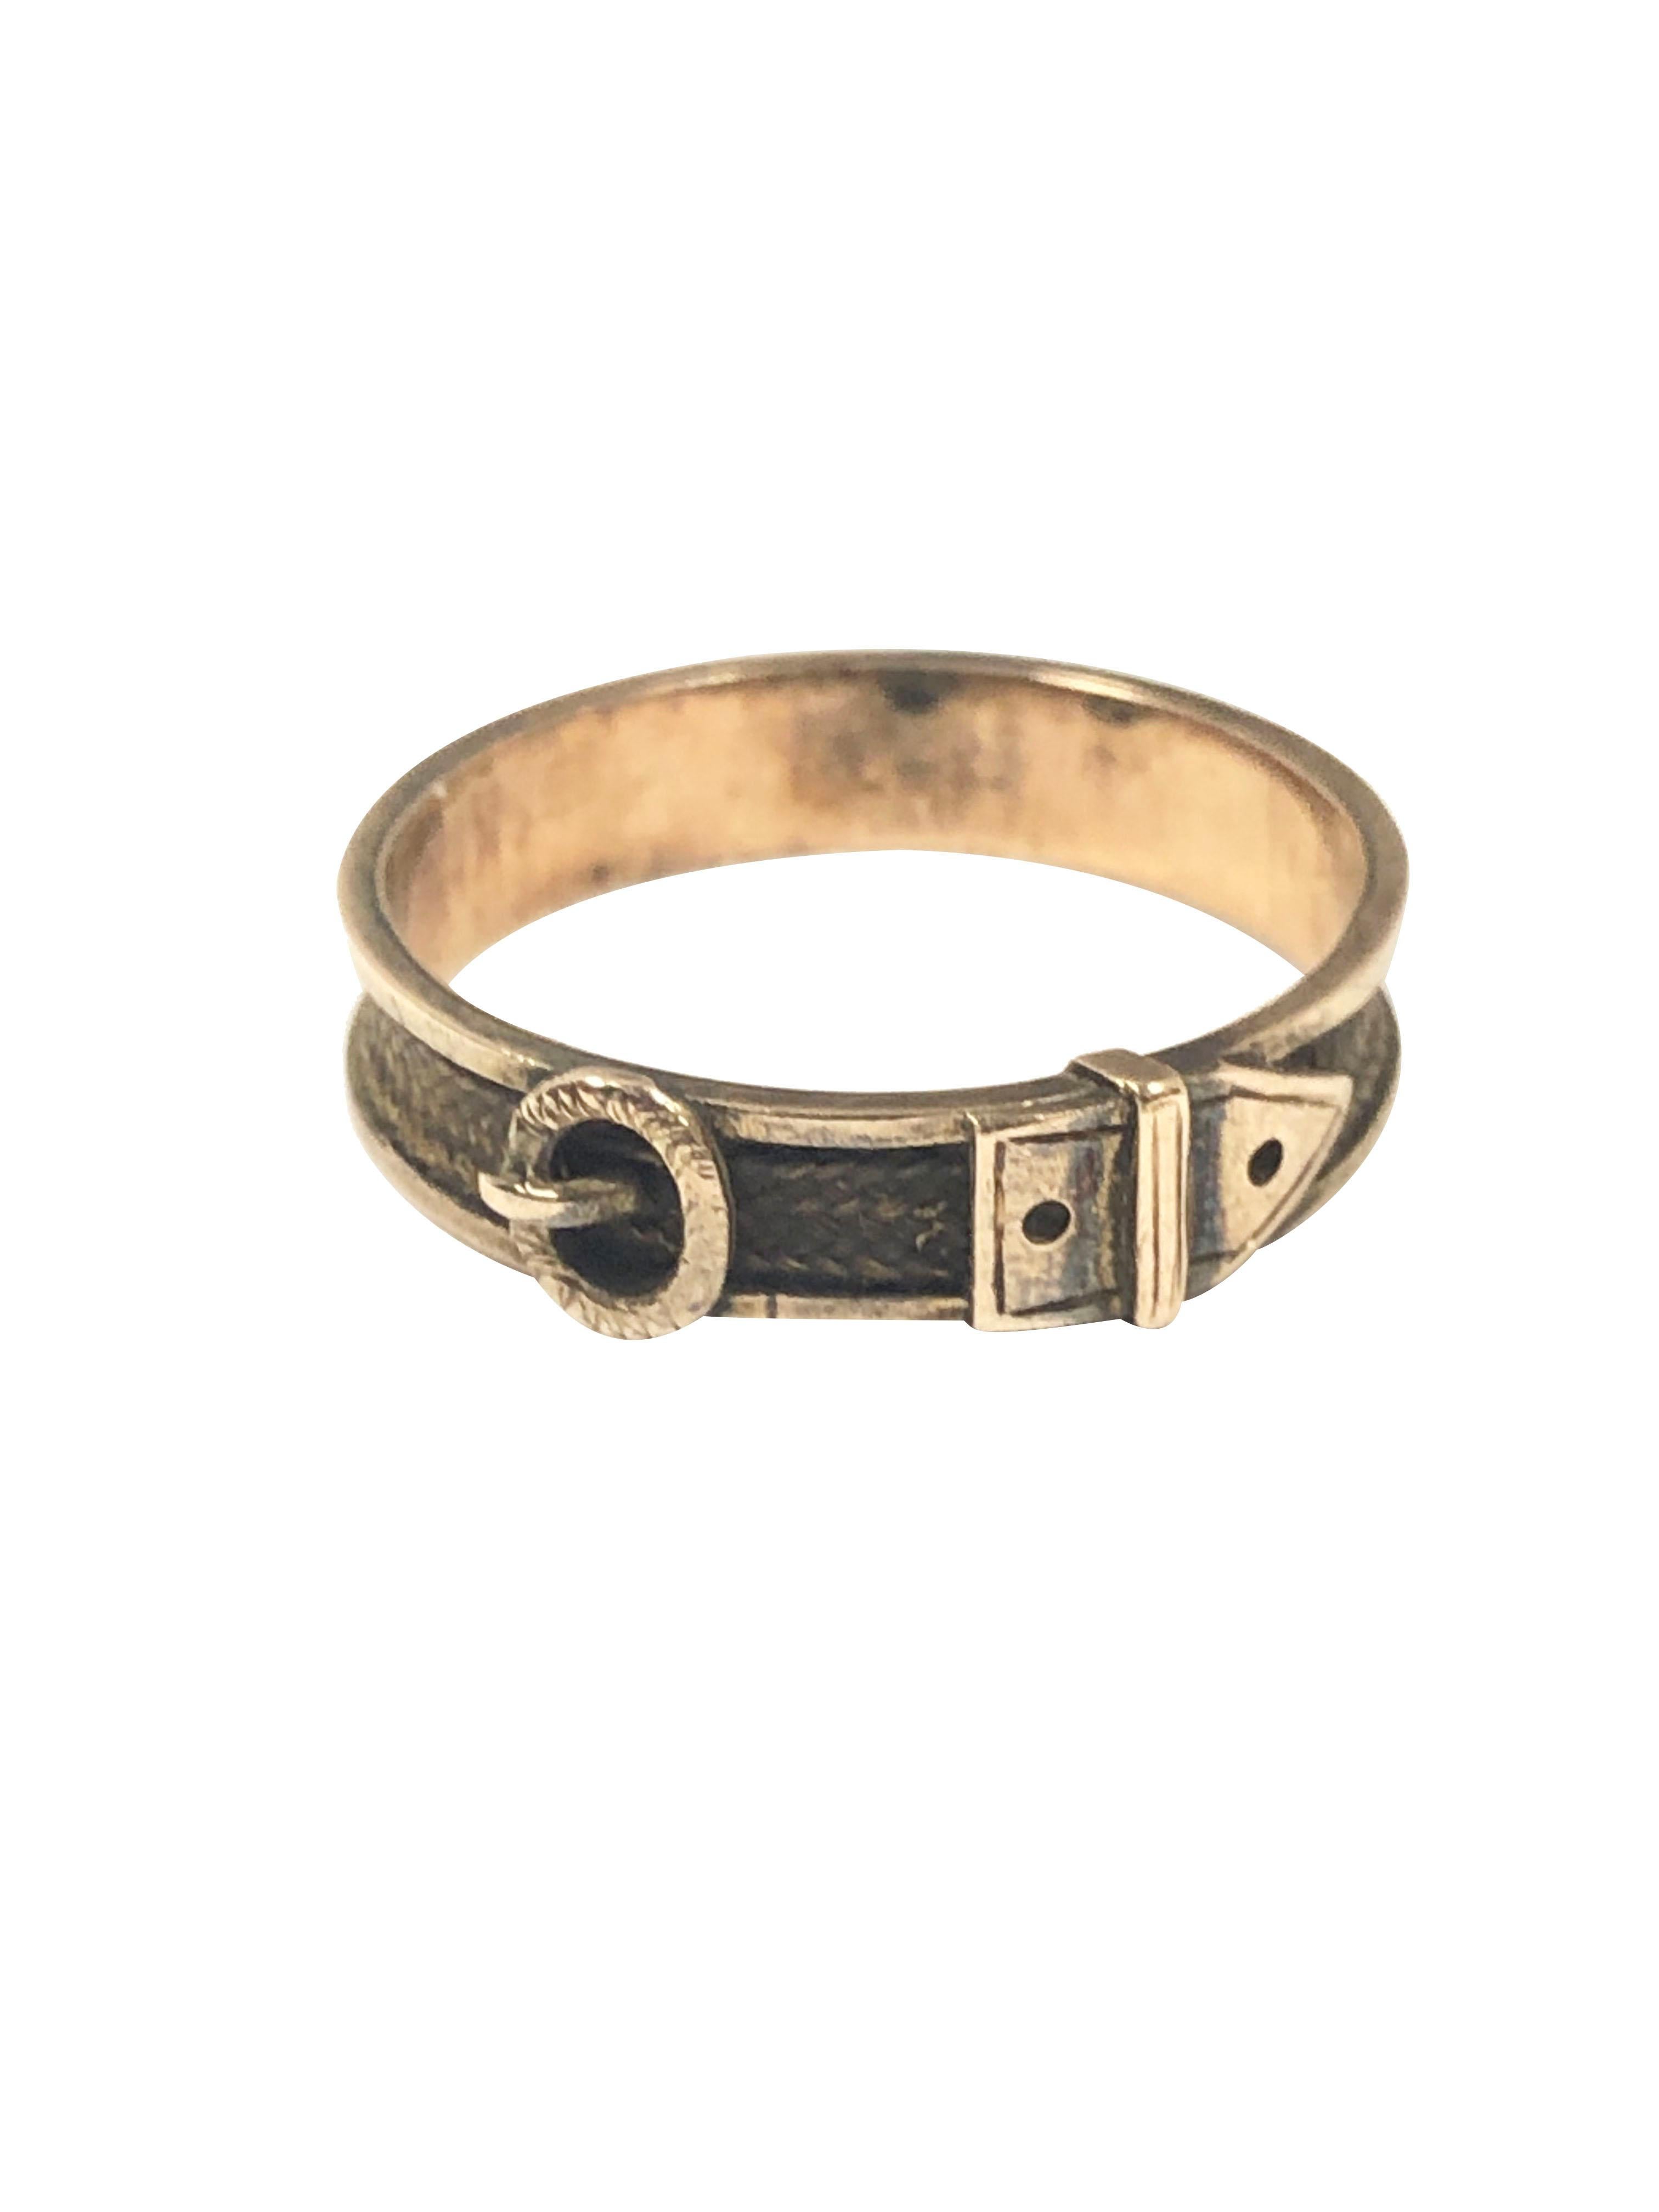 Circa 1850s Yellow Gold Buckle Form Mourning, Memorial Ring, measuring 3/16 inch wide with the center set with woven hair.  Finger size 10,  amazing, excellent condition considering the age.